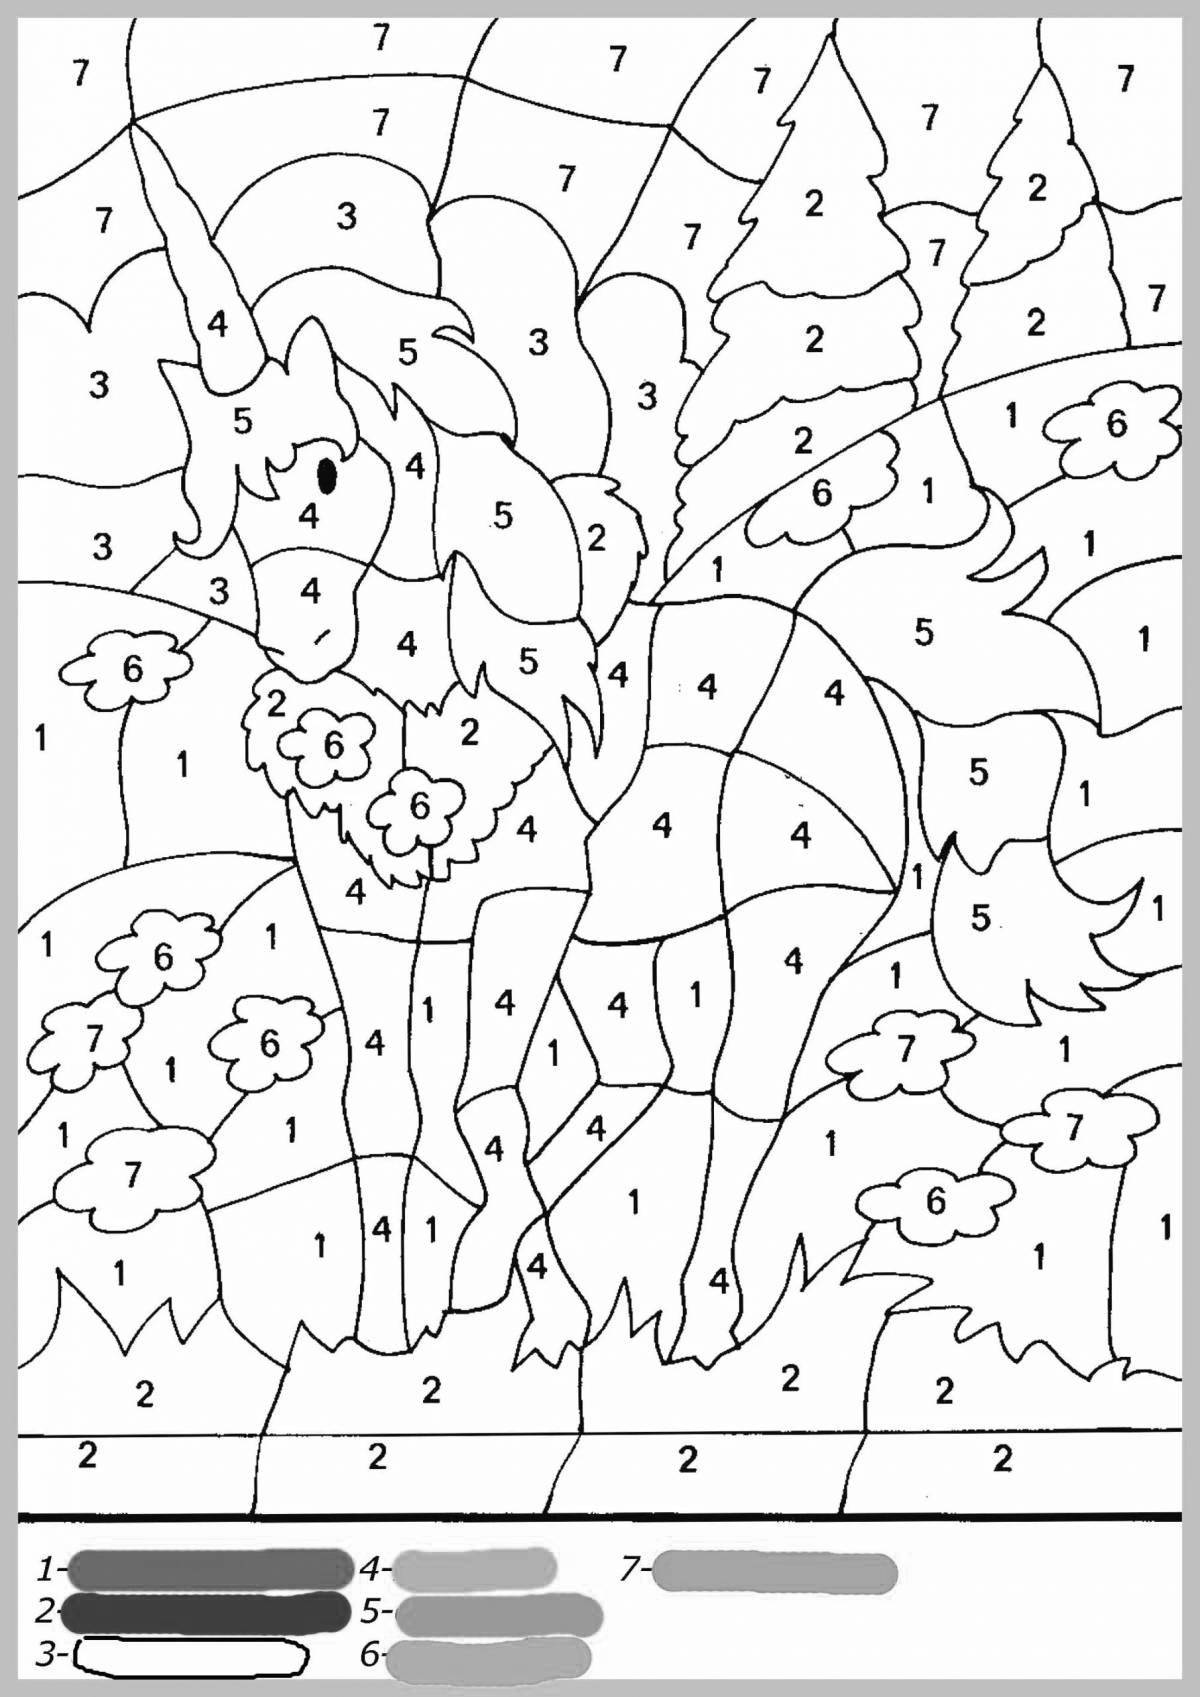 Fun coloring by numbers up to 20